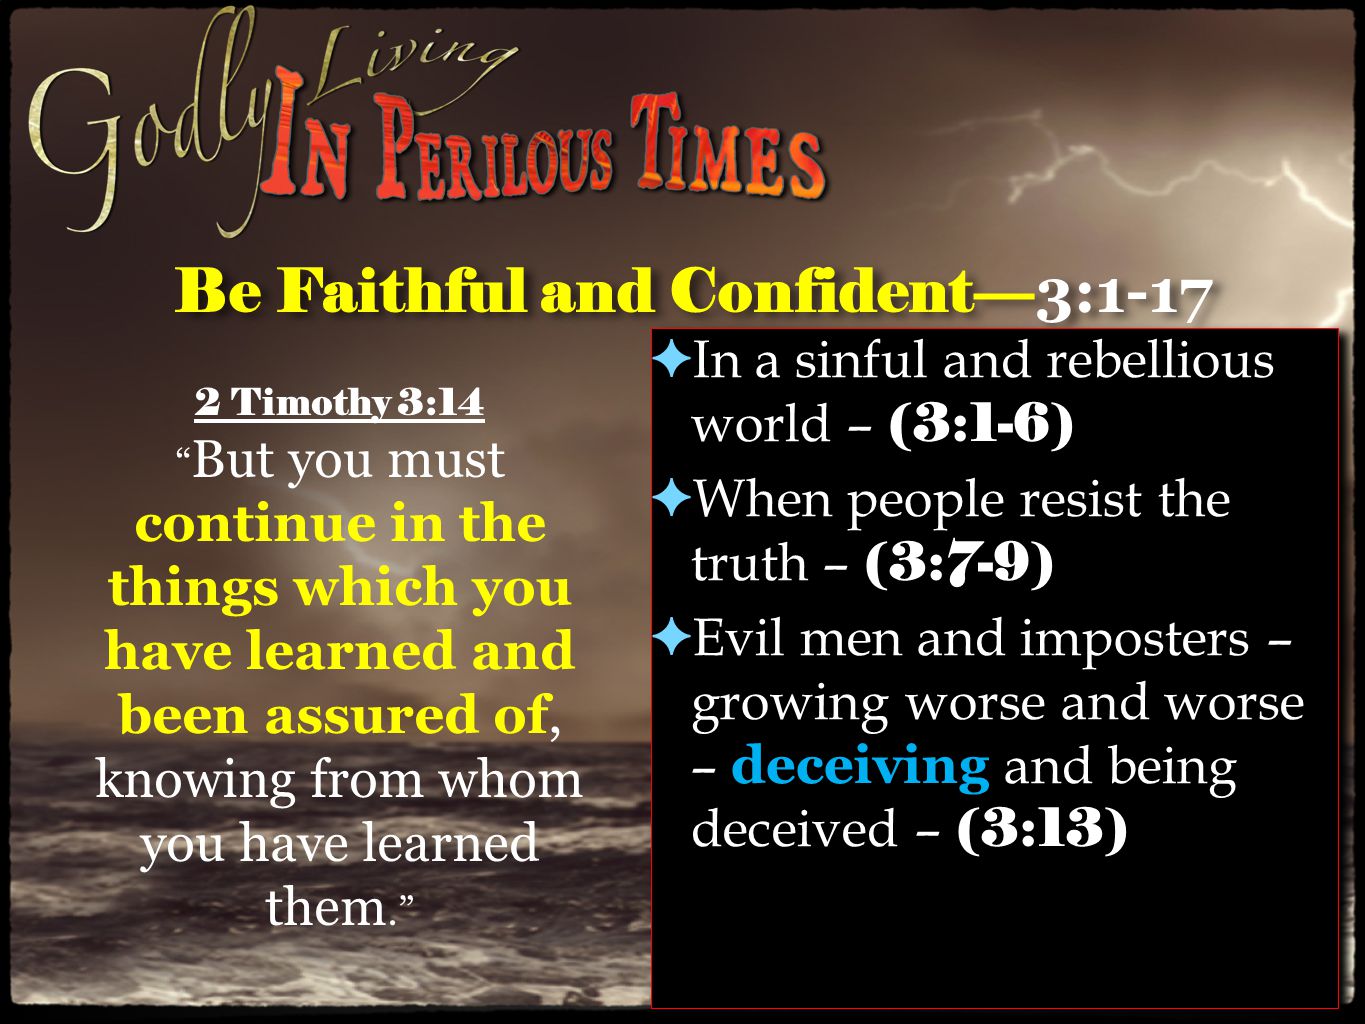 Be Faithful and Confident— 3:1-17 ✦ In a sinful and rebellious world – (3:1-6) ✦ When people resist the truth – (3:7-9) ✦ Evil men and imposters – growing worse and worse – deceiving and being deceived – (3:13) ✦ In a sinful and rebellious world – (3:1-6) ✦ When people resist the truth – (3:7-9) ✦ Evil men and imposters – growing worse and worse – deceiving and being deceived – (3:13) 2 Timothy 3:14 But you must continue in the things which you have learned and been assured of, knowing from whom you have learned them.